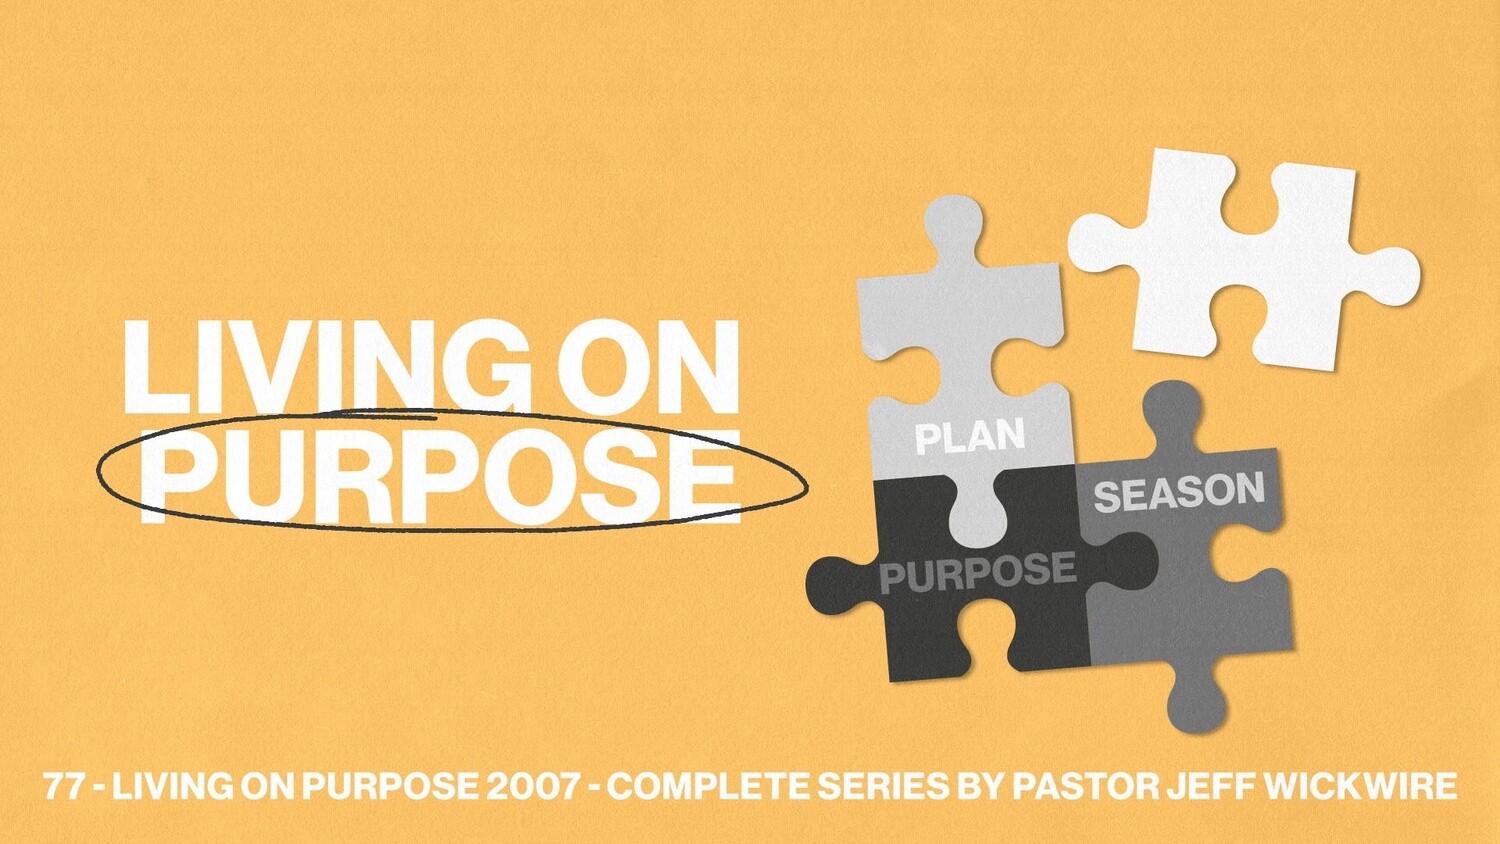 77 - Living On Purpose 2007 - Complete Series By Pastor Jeff Wickwire